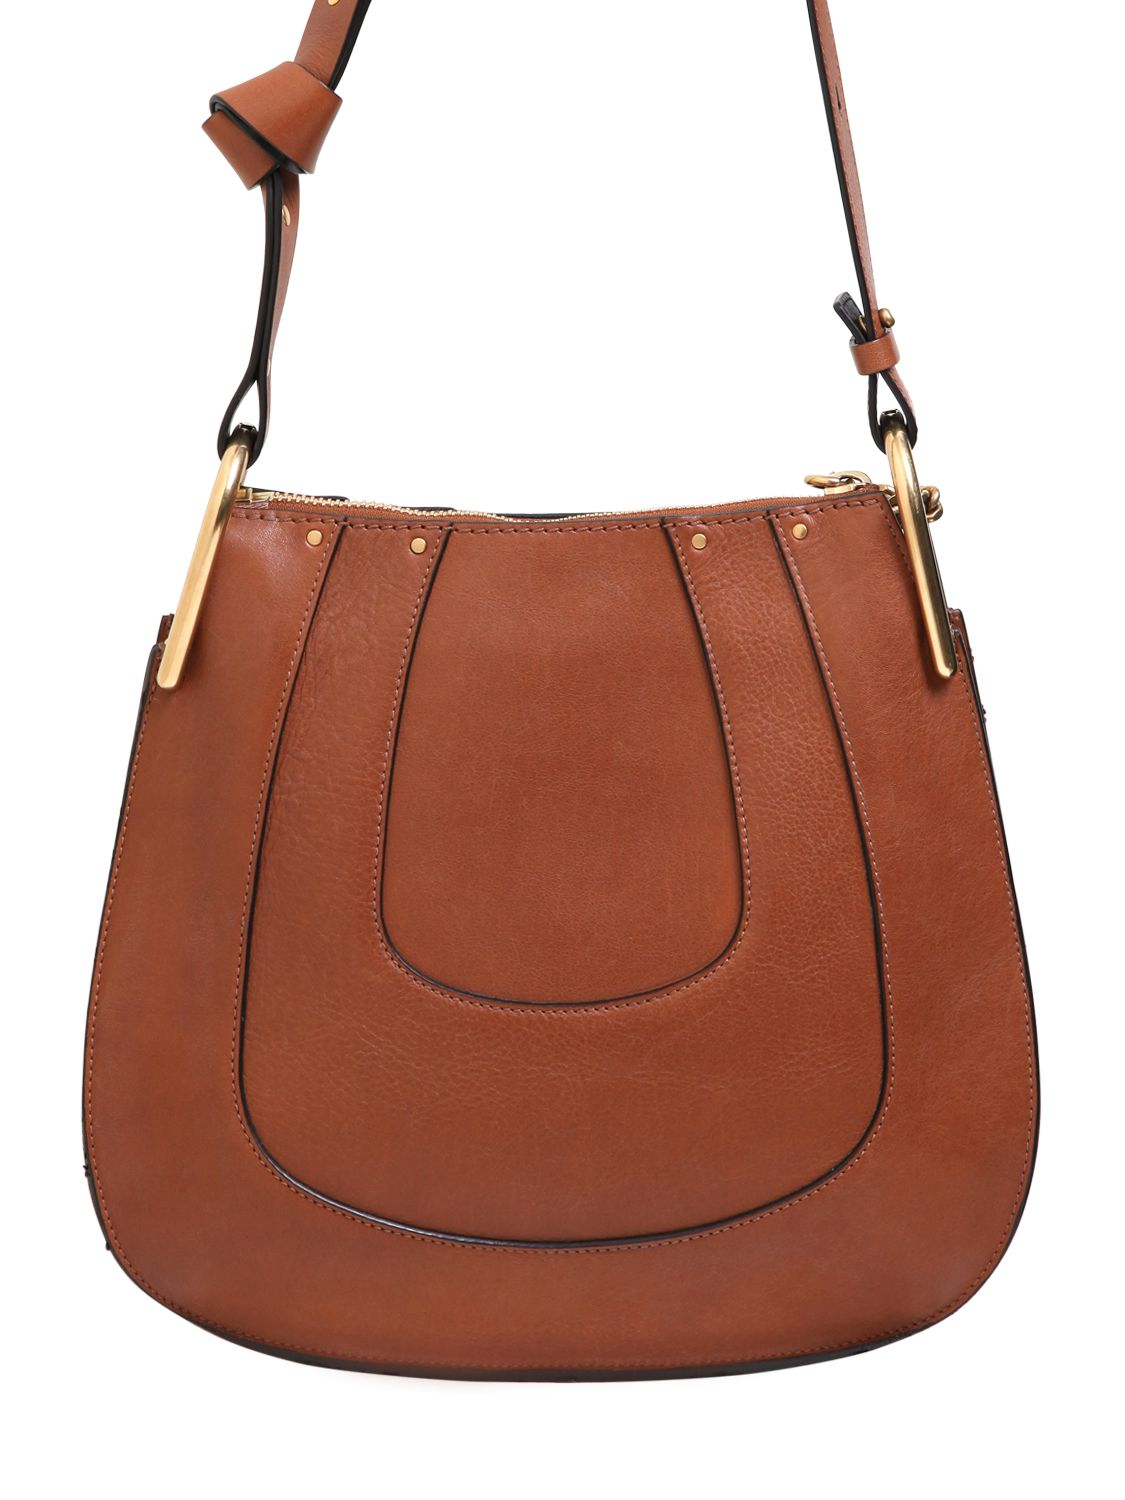 Chloé Small Hayley Smooth Leather Hobo Bag in Tan (Brown) - Lyst